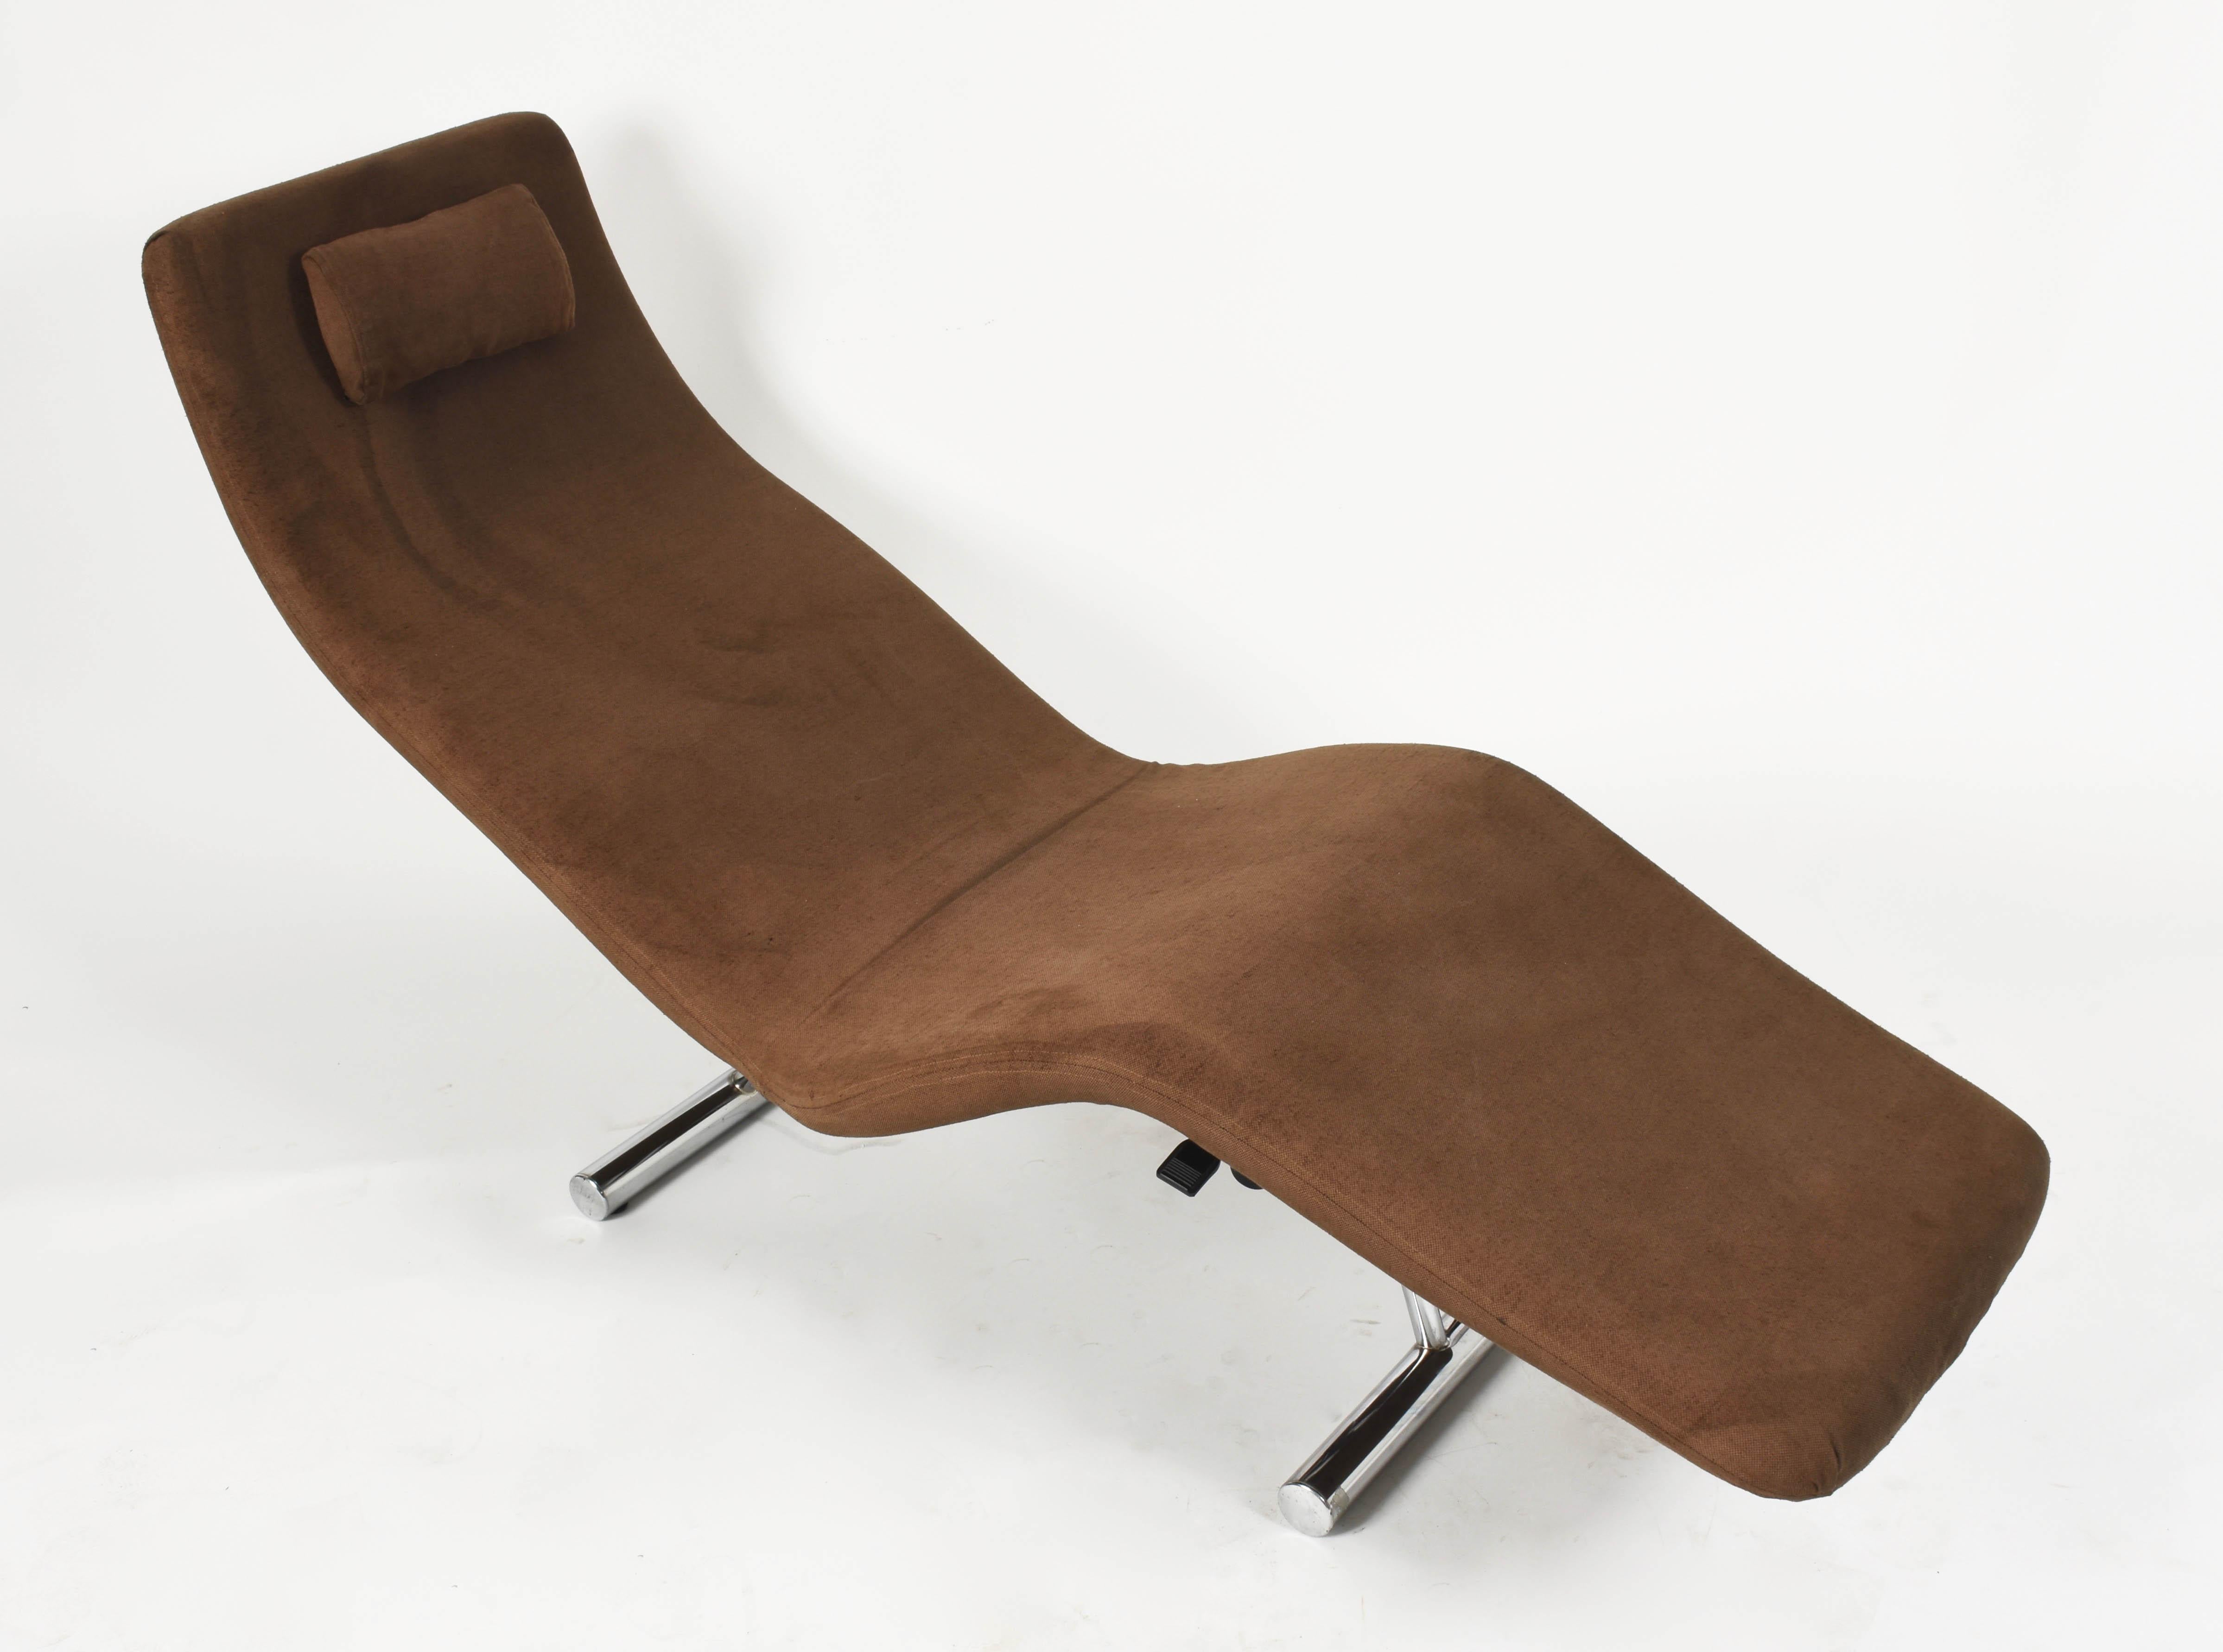 Late 20th Century Midcentury Brown Fabric and Chrome Steel Chaise Longue, Paul Tuttle Style, 1980s For Sale